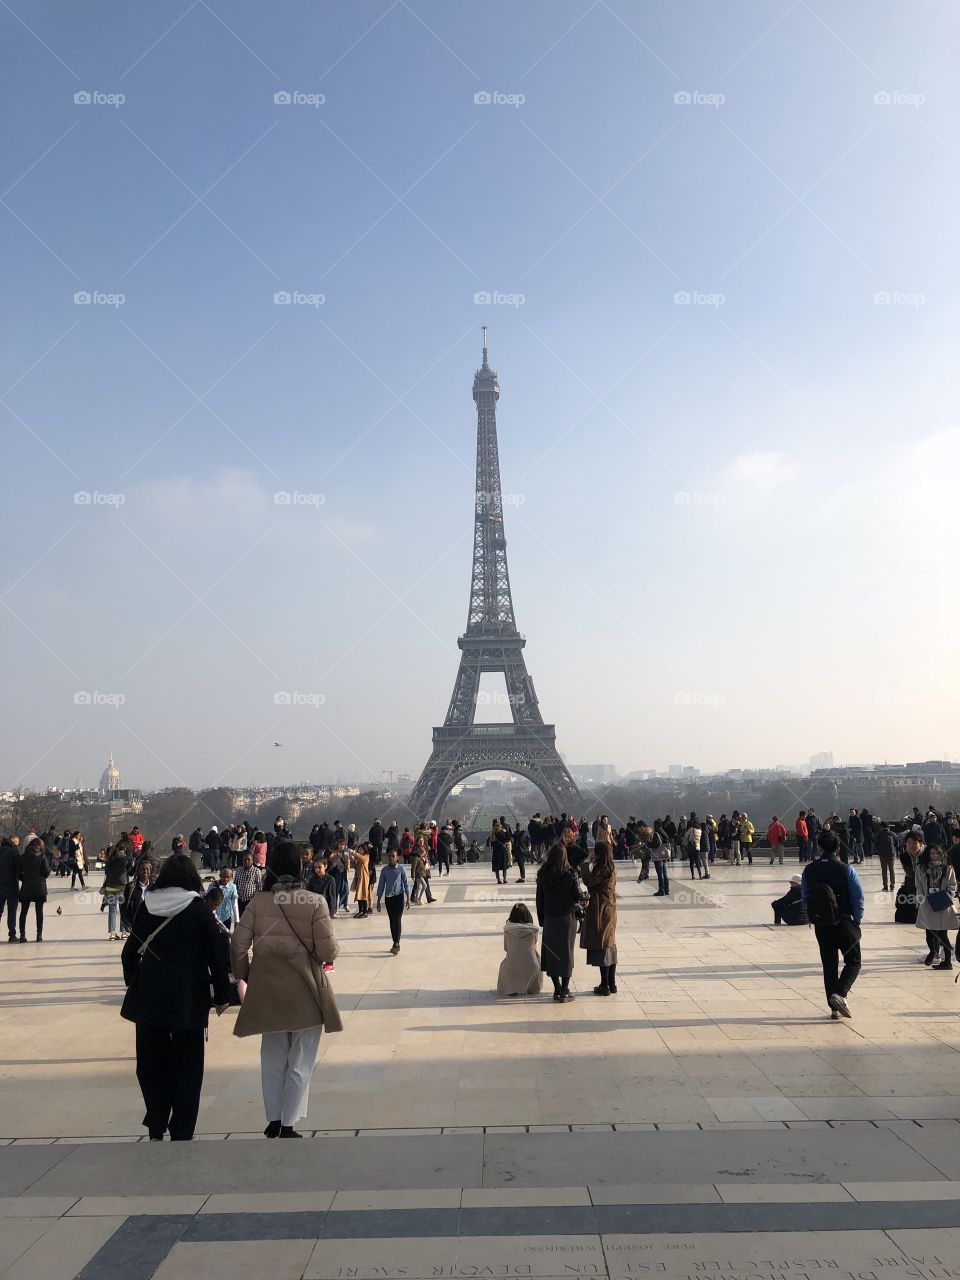 Tourists in front of the Eiffel Tower. (Trocadéro)